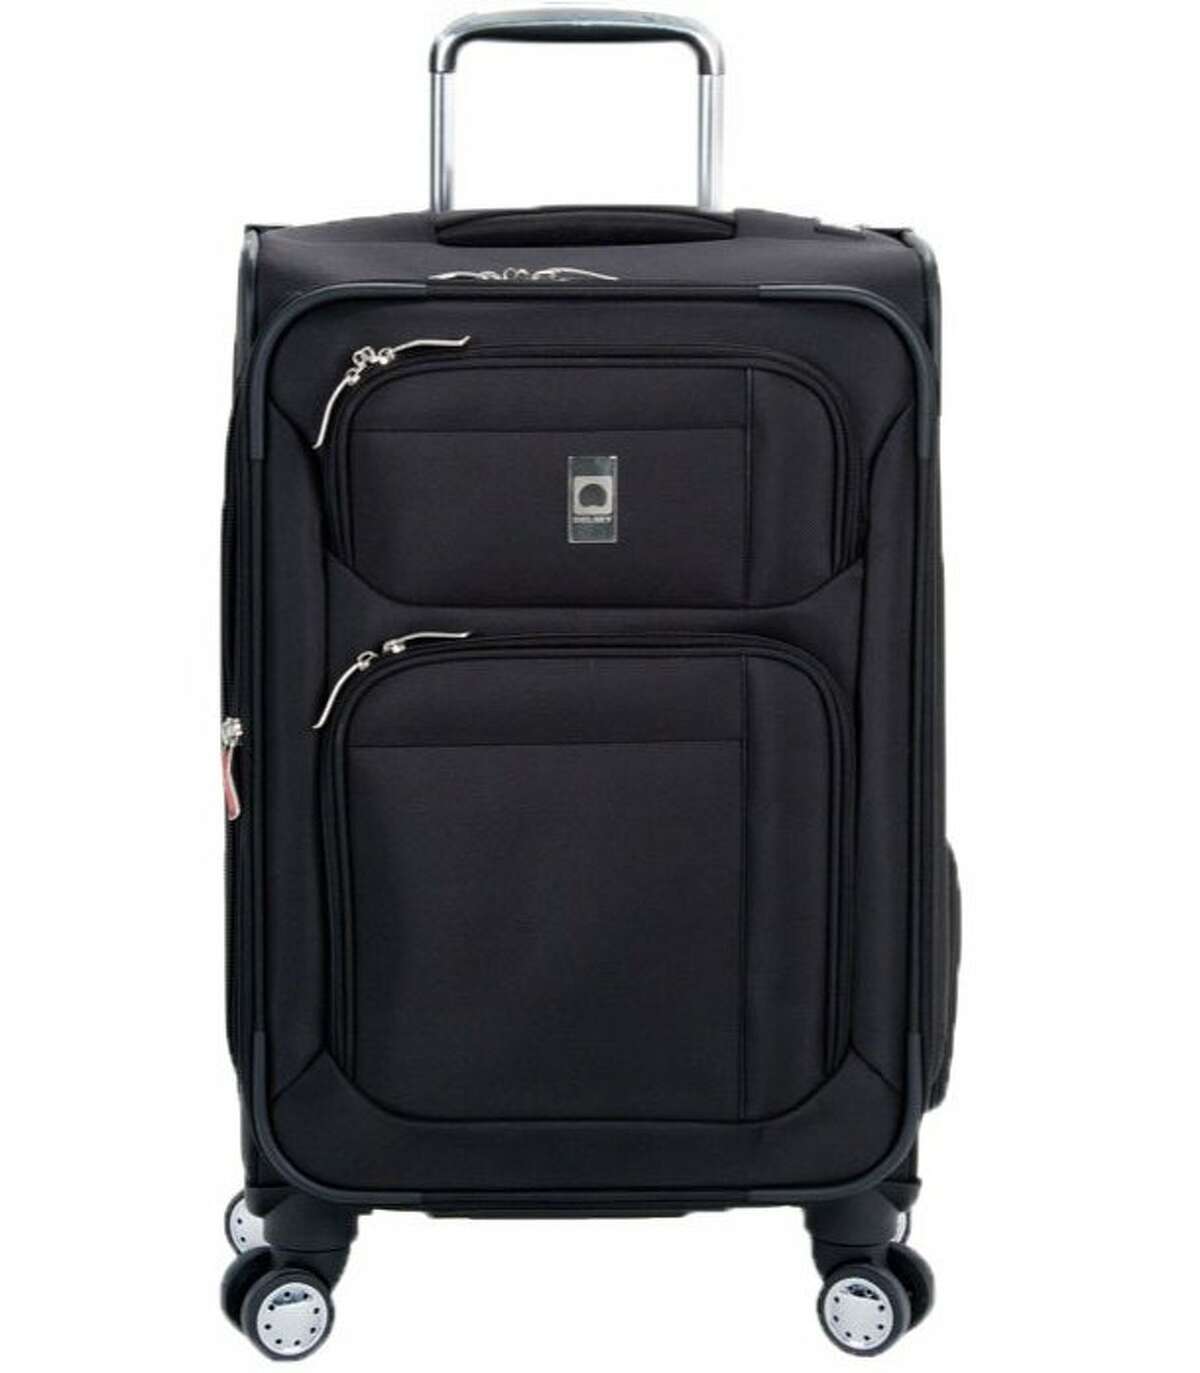 The Helium Breeze suitcase has an integrated laundry bag hatch and overweight indicator.